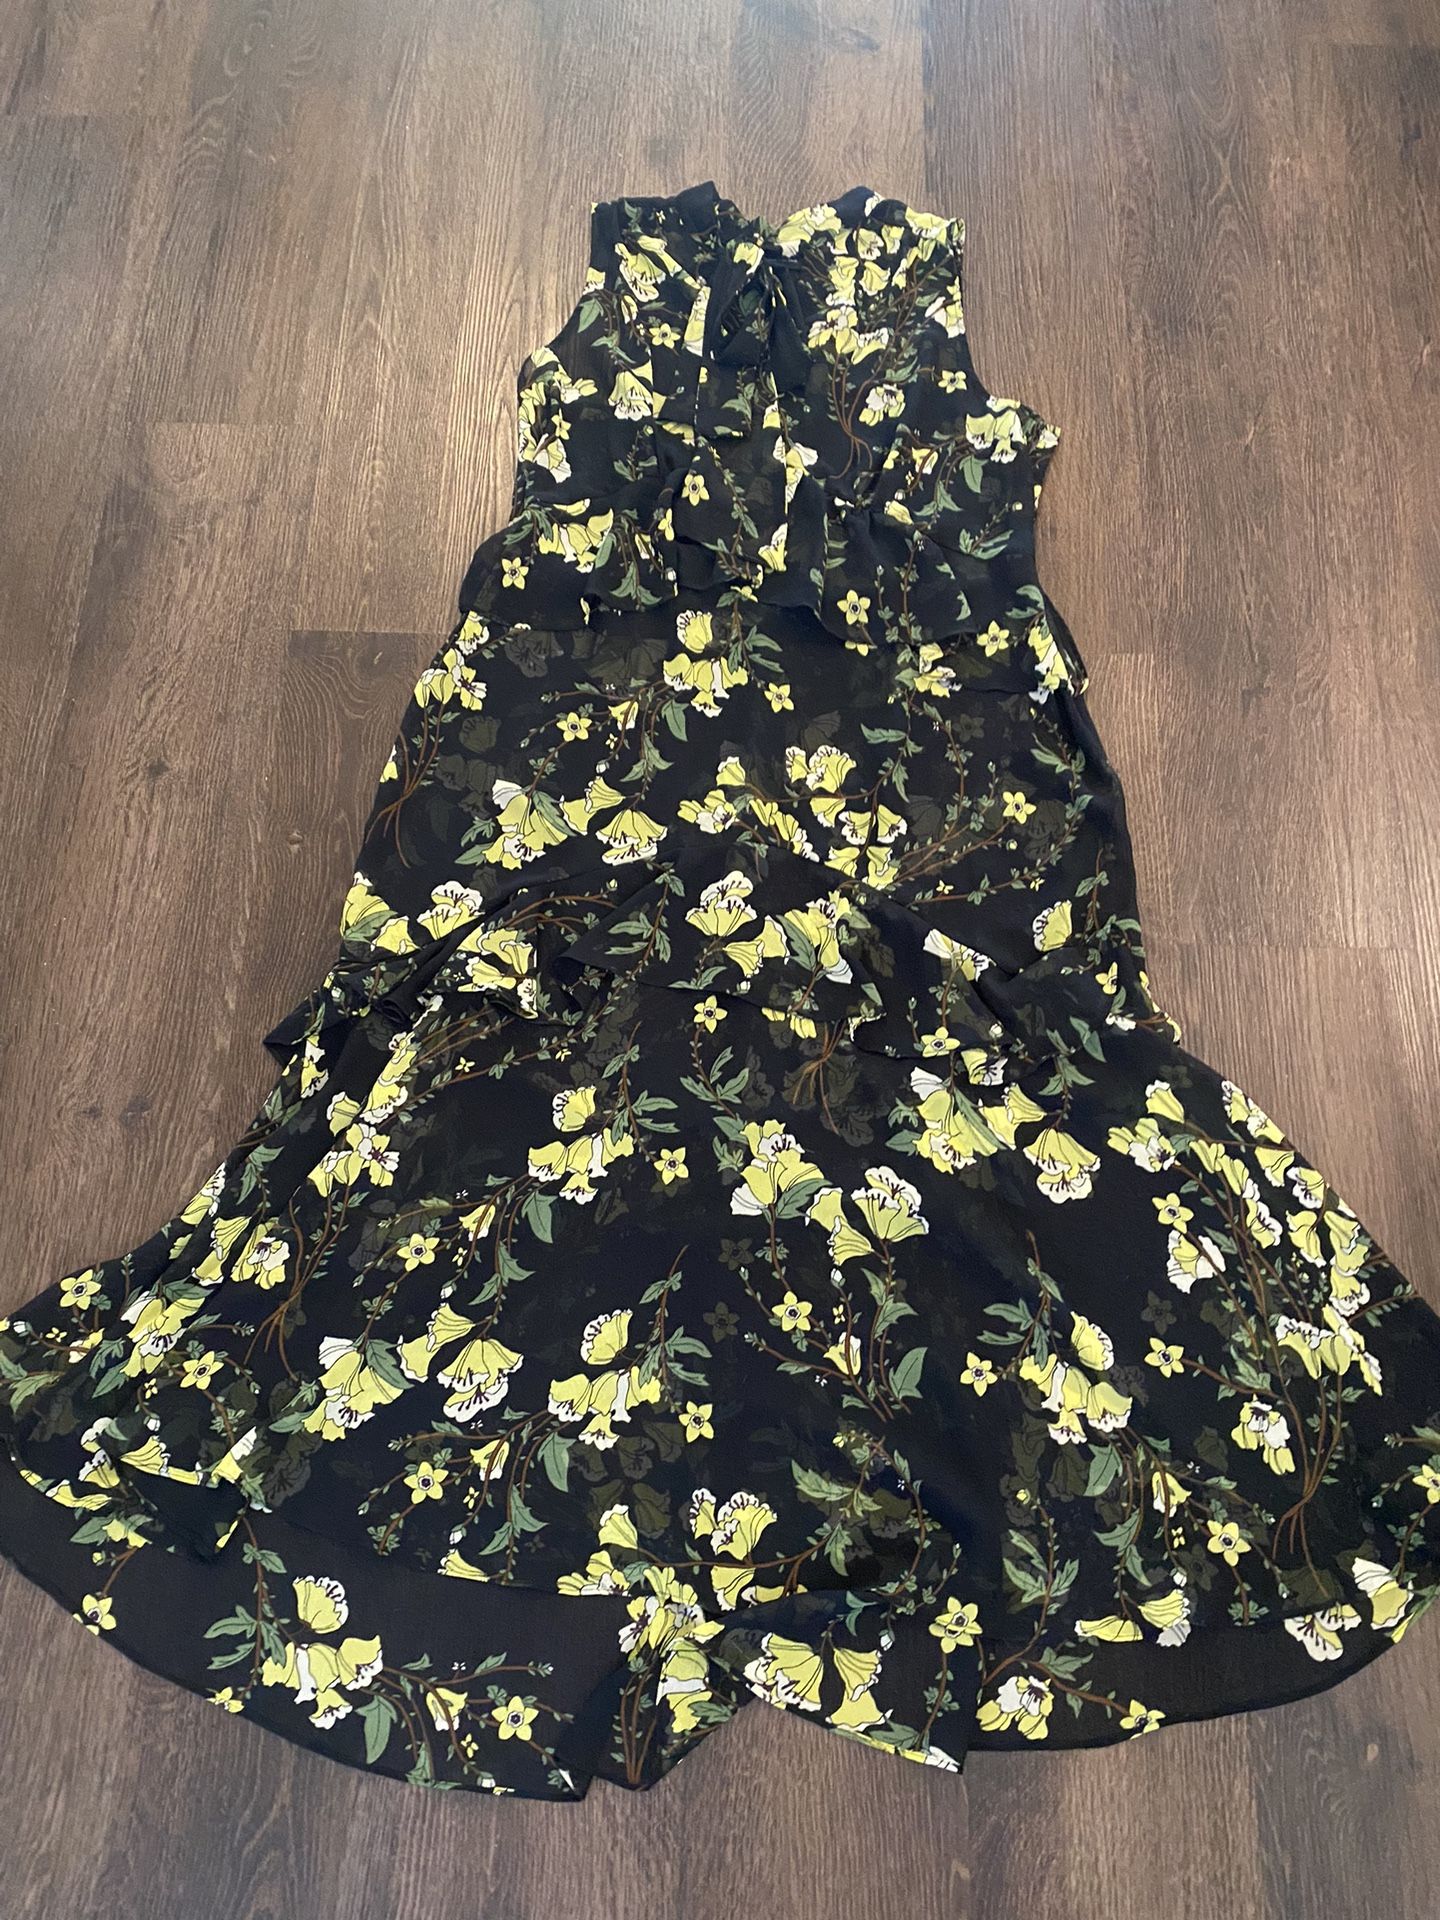 Womans Black And Yellow Ruffle Sheer Dress By Who What Wear Size XXL #18